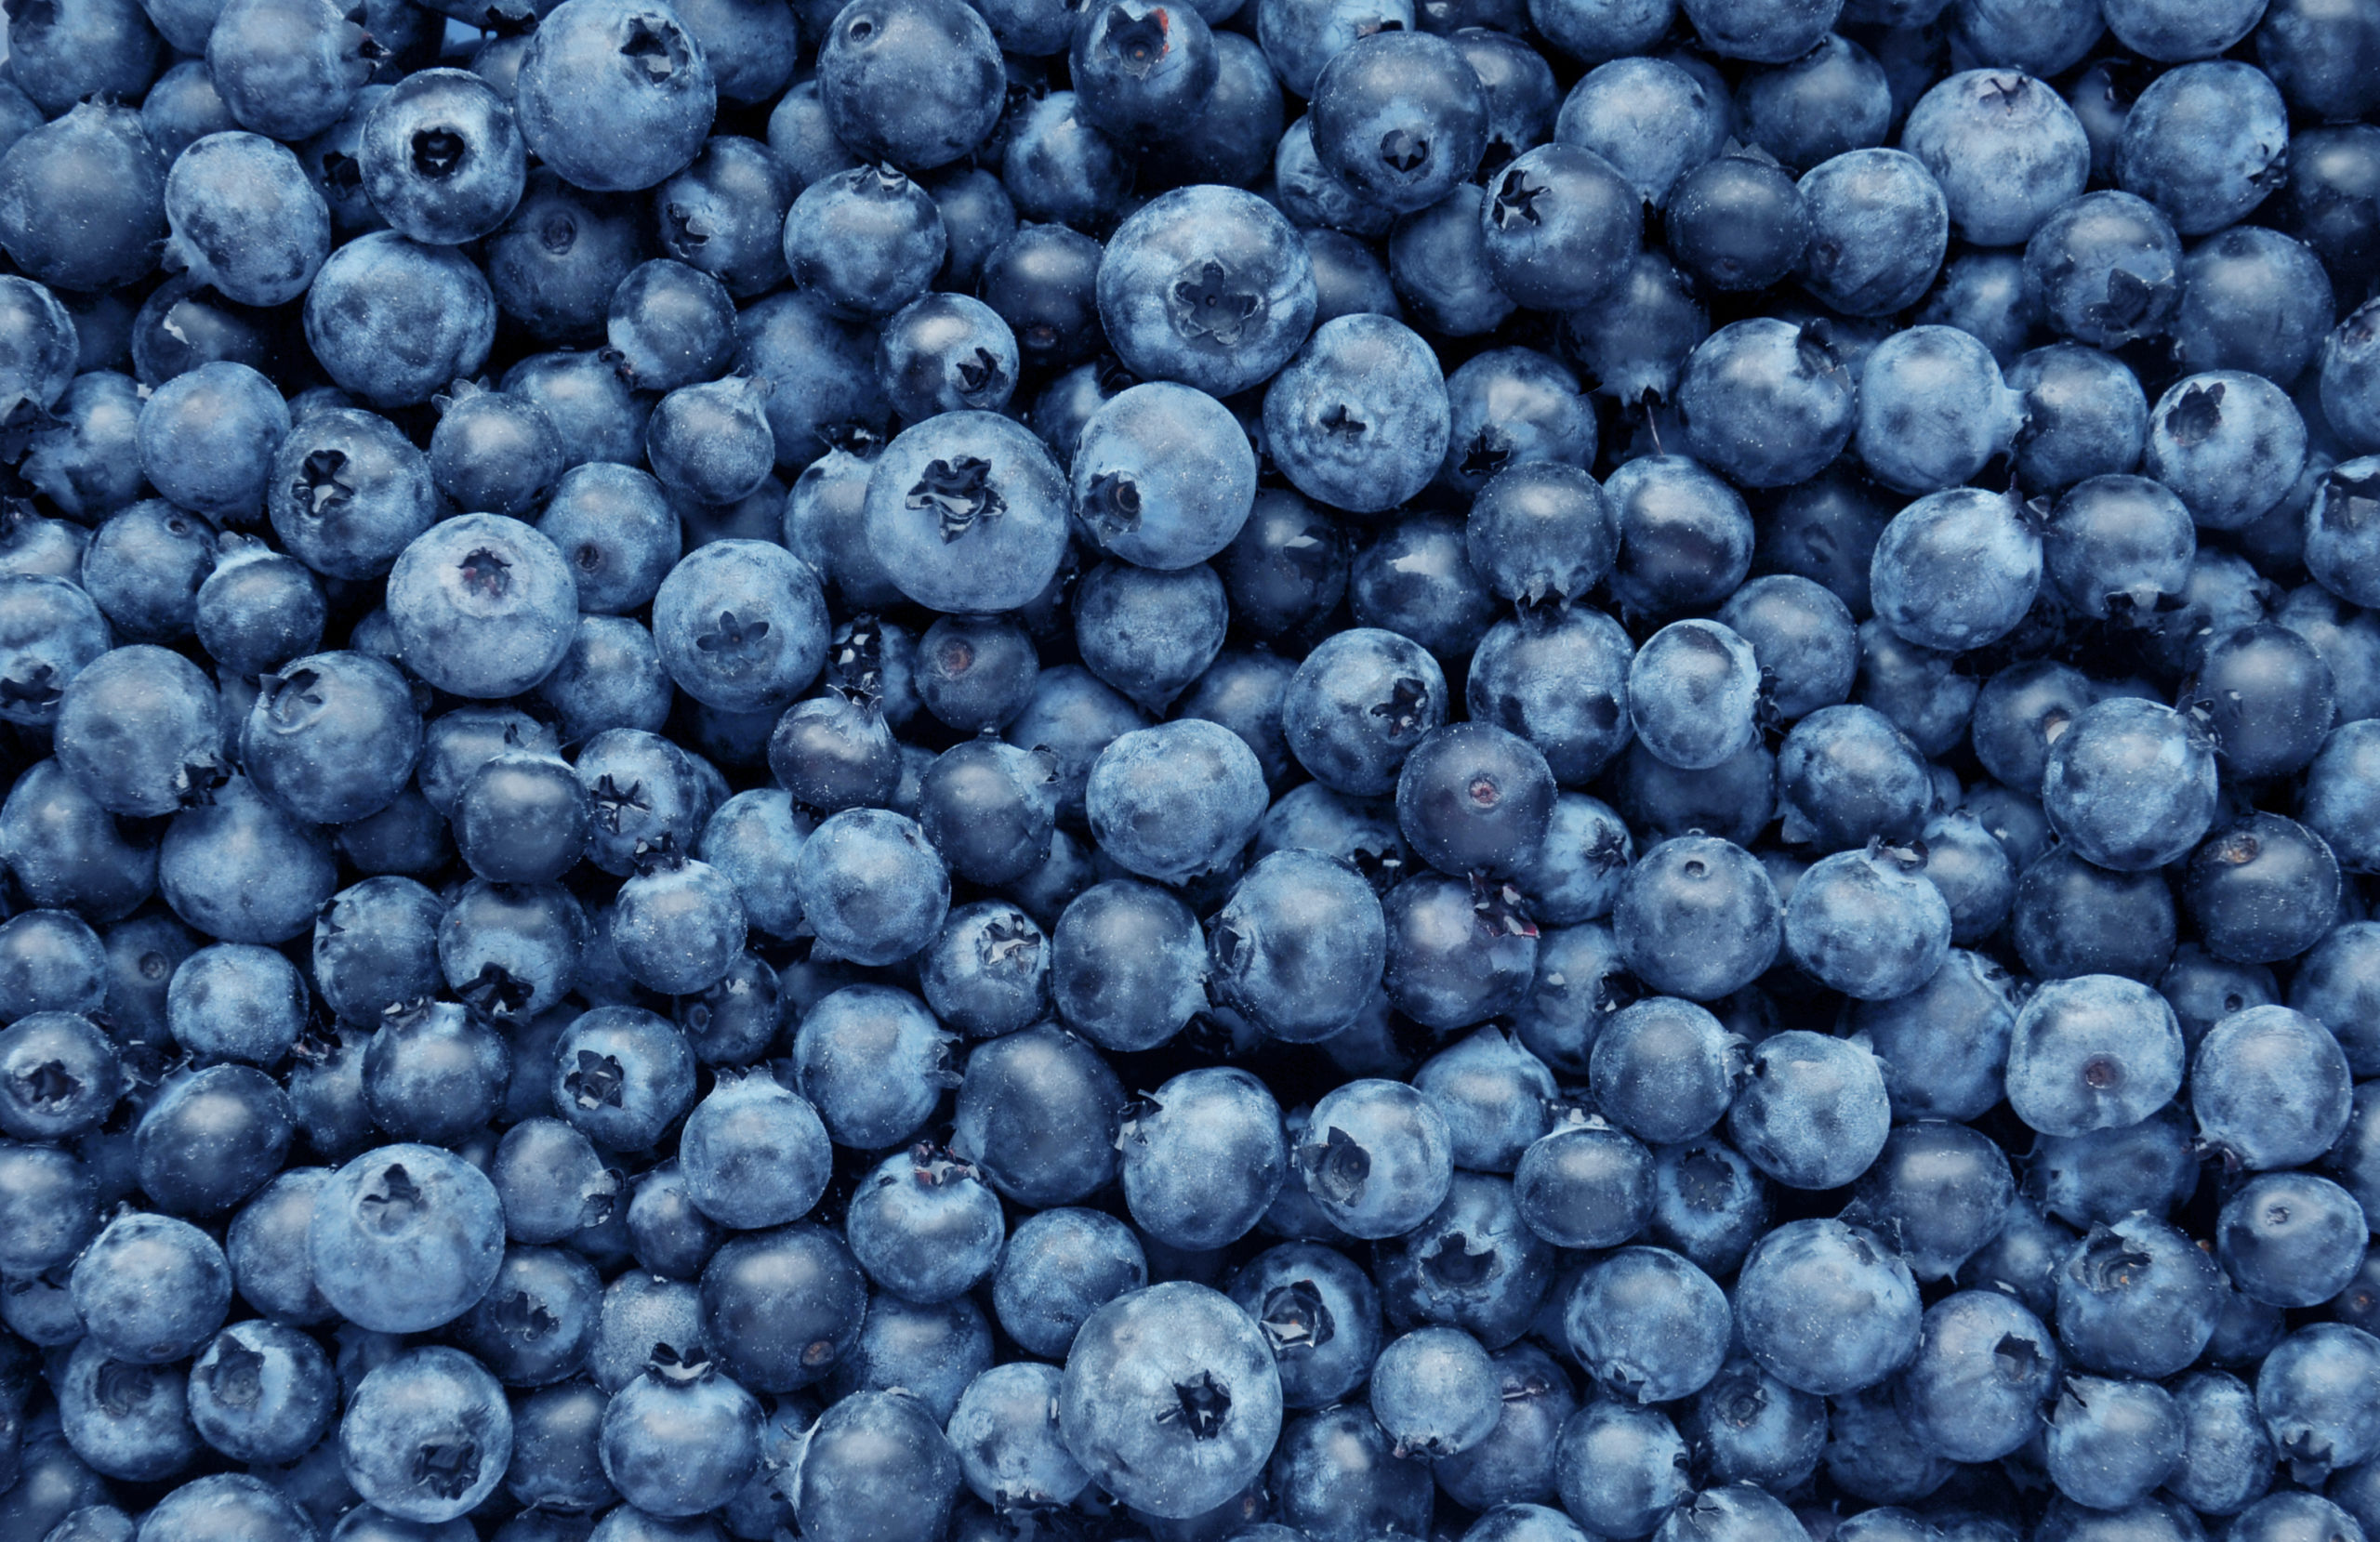 A background full of freshly picked blueberries